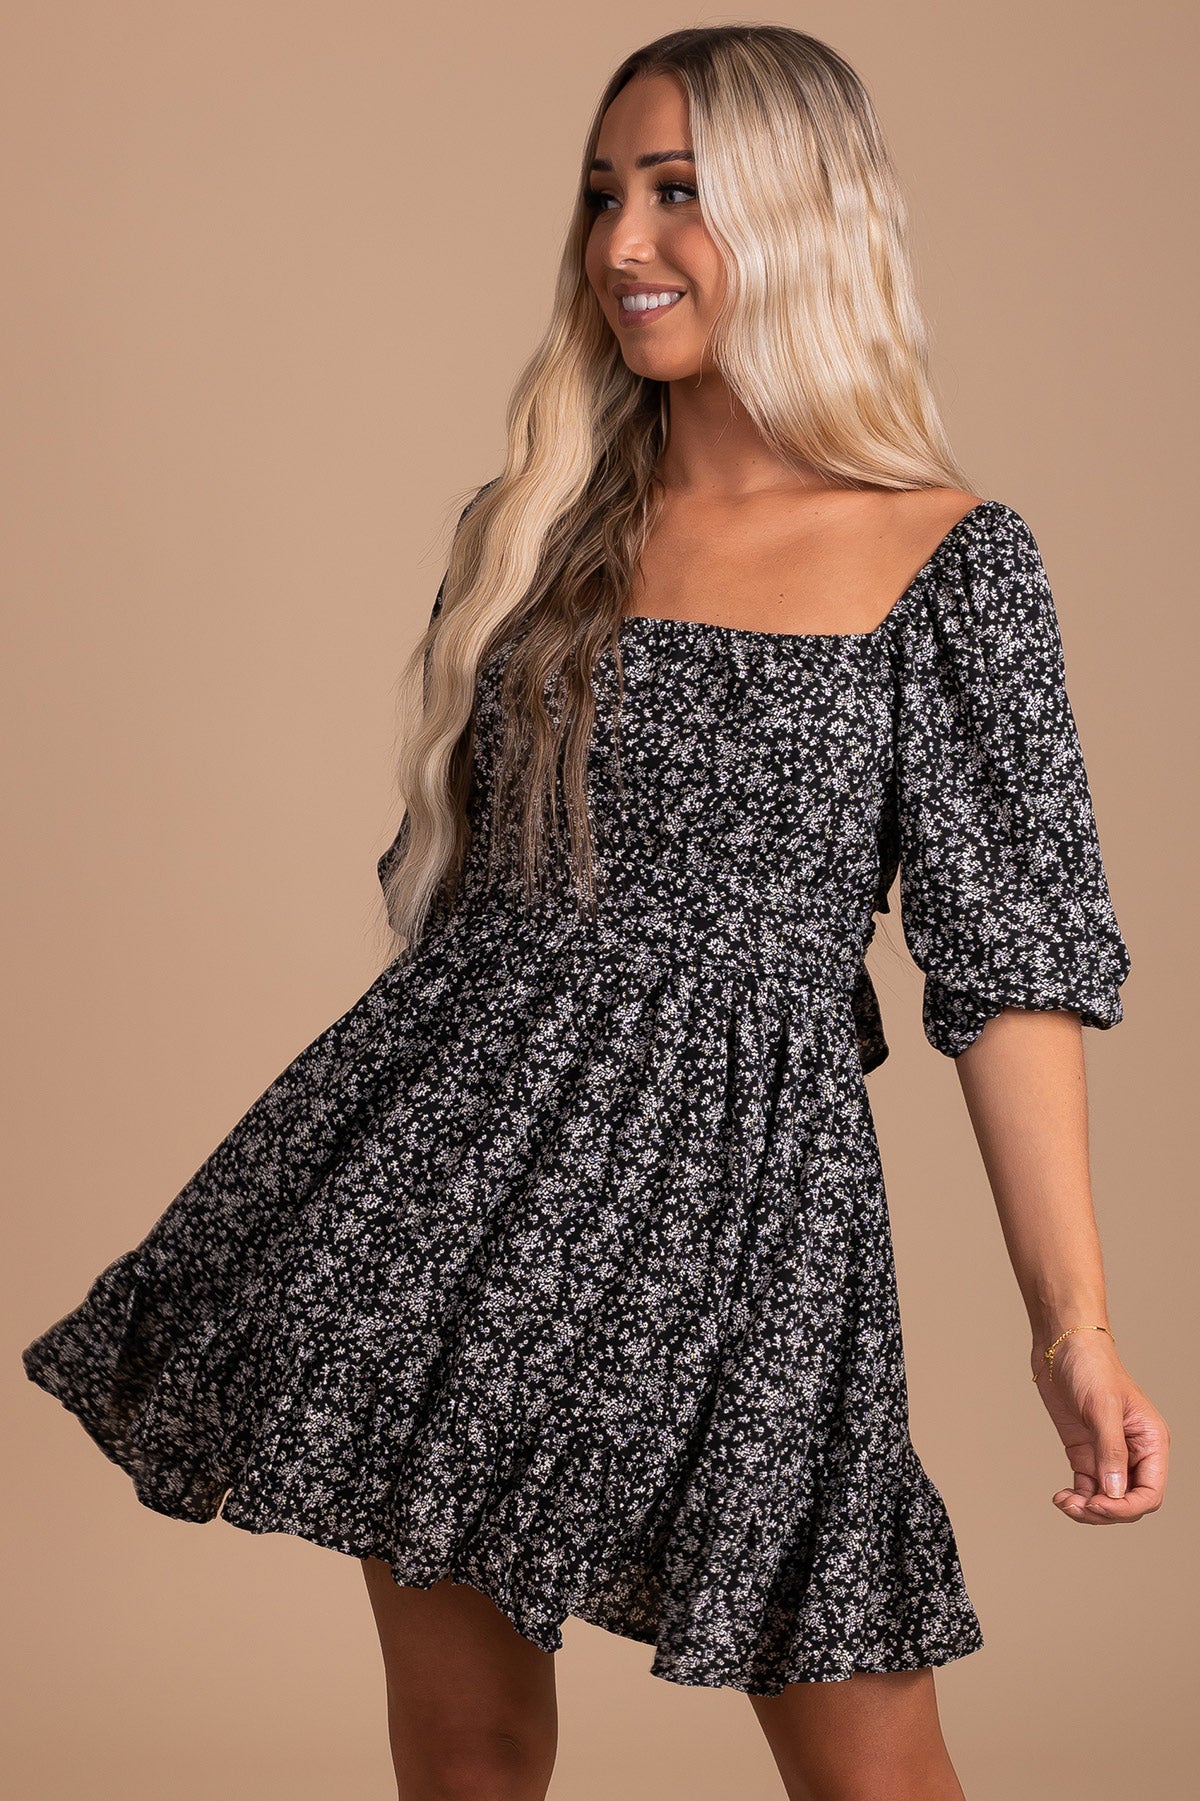 Black and White Floral Mini Dress for Women